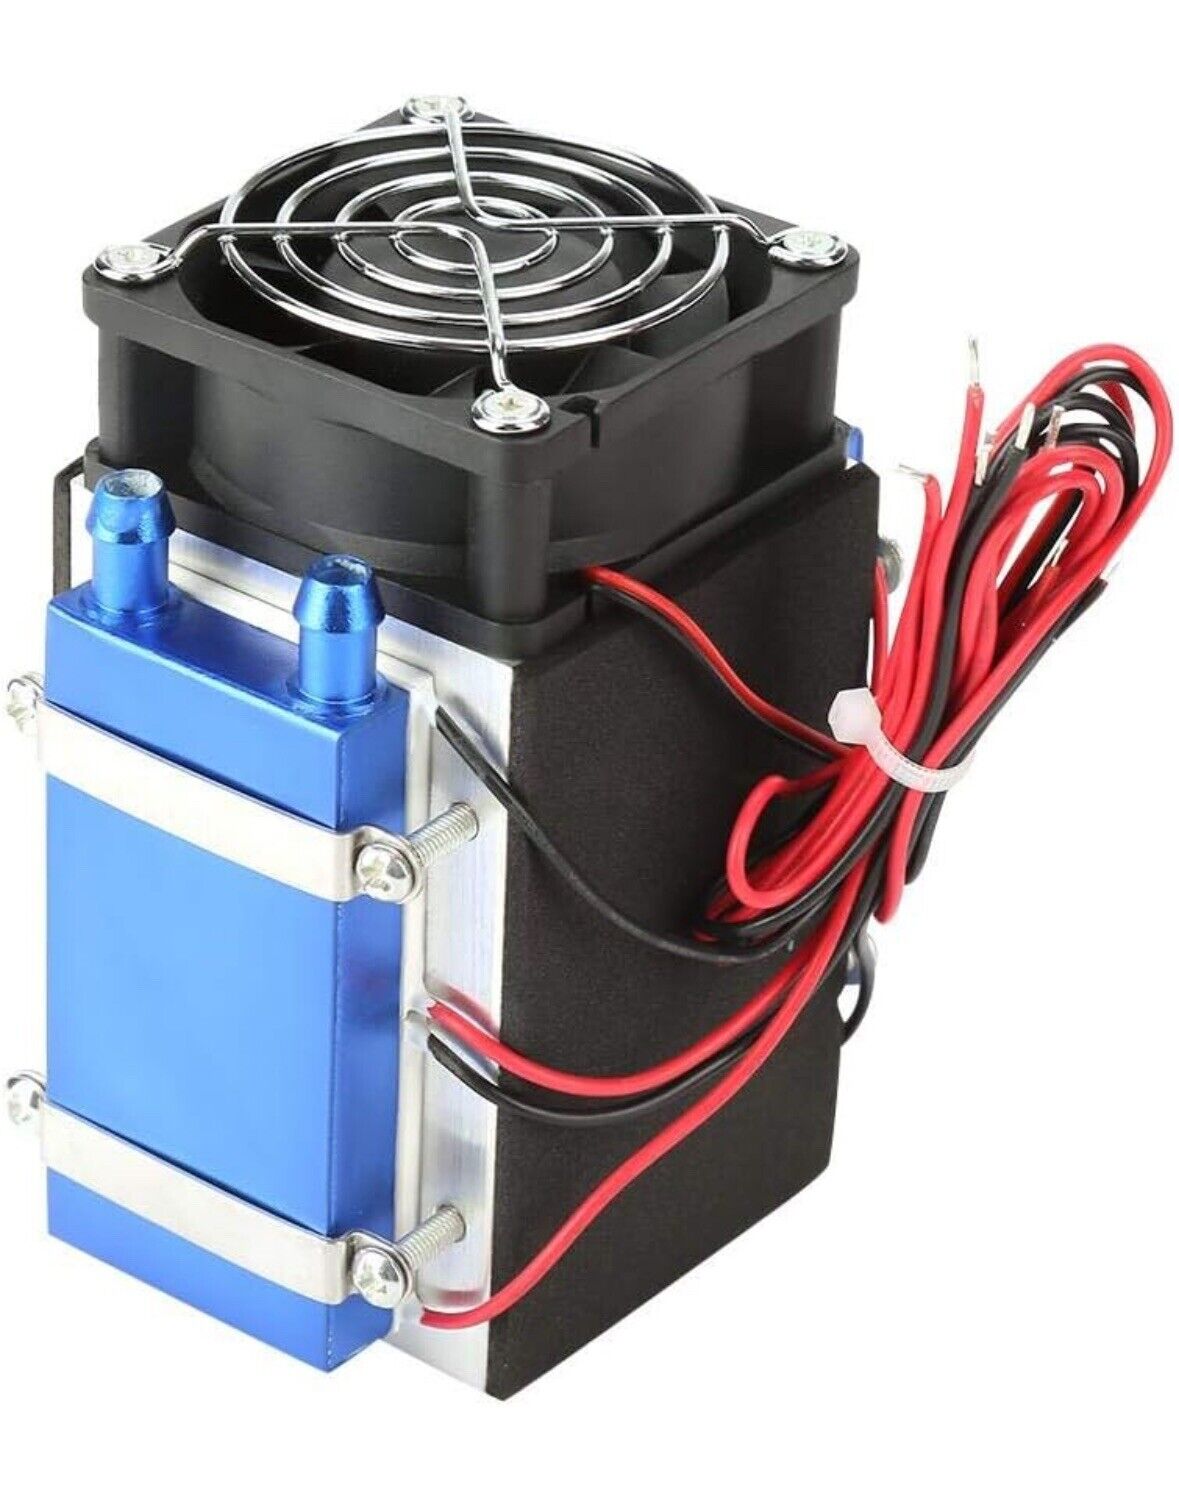 4 Chip DC 12V 280W 24A Semiconductor Refrigeration Machine Cooler Cooling Device